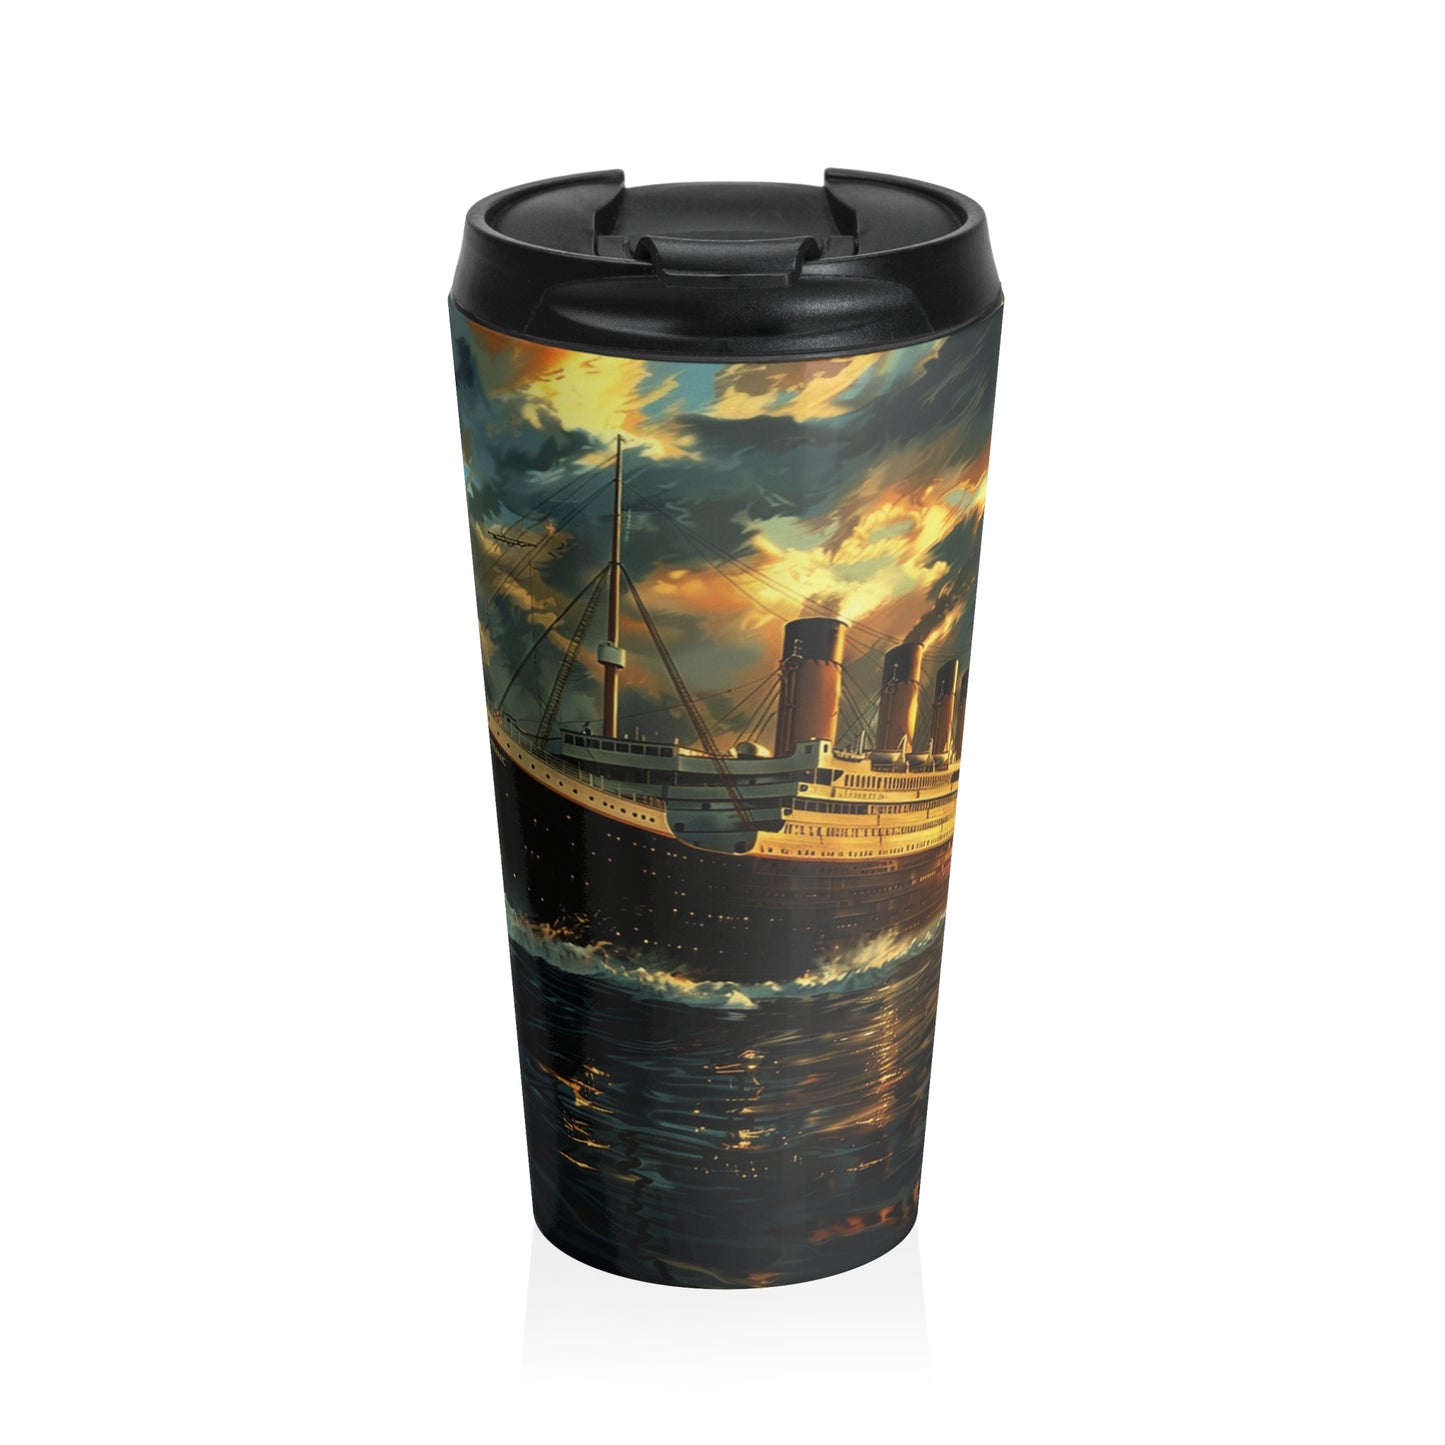 RMS Titanic Stainless Steel Travel Mug | Insulated Cup Ocean Liner Legend White Star Line